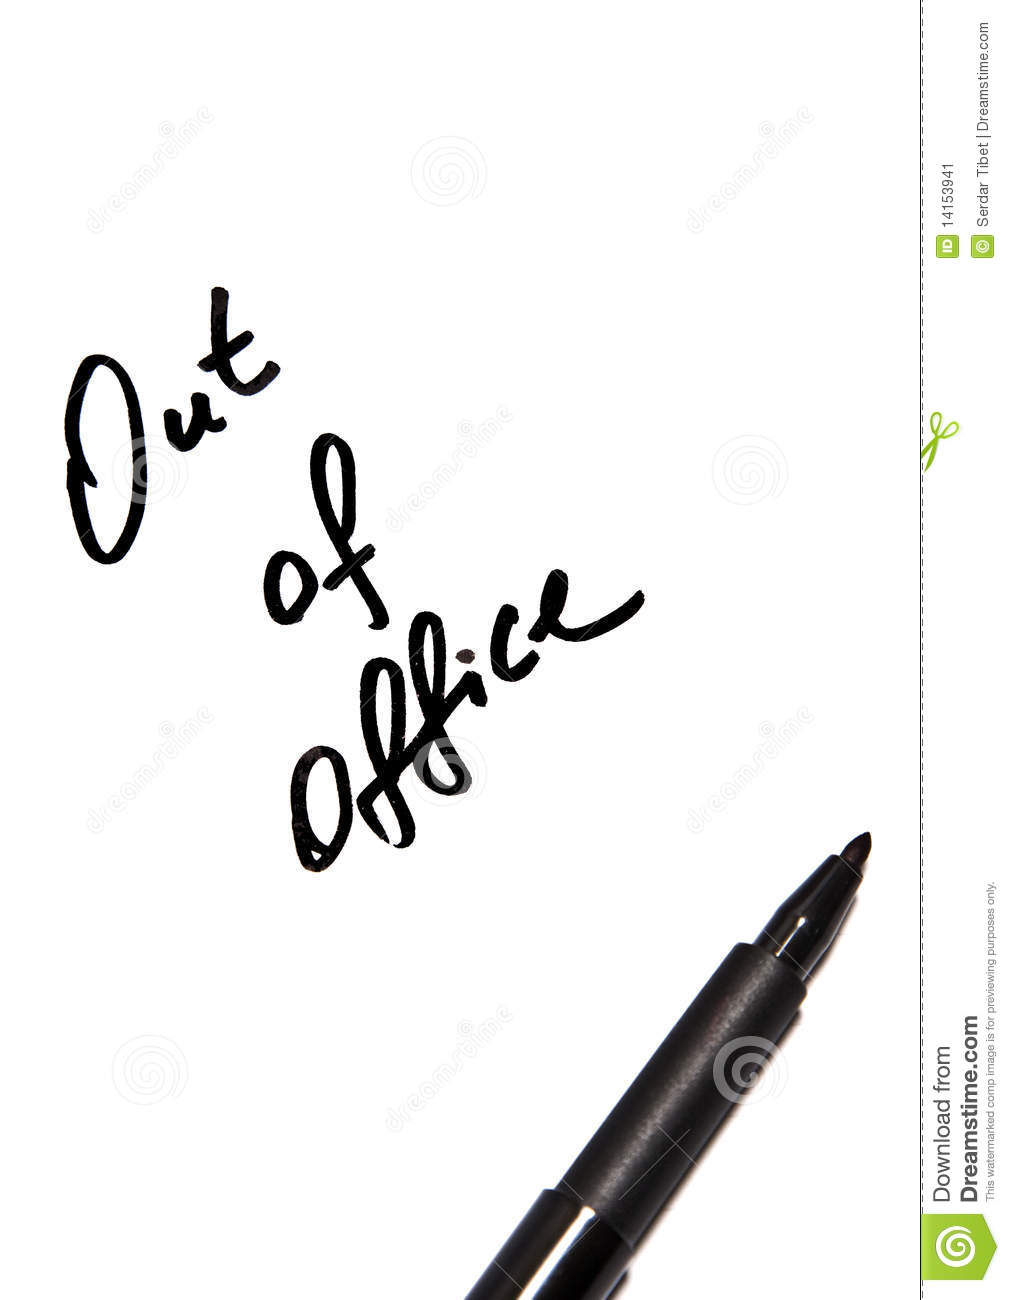 Out of office script